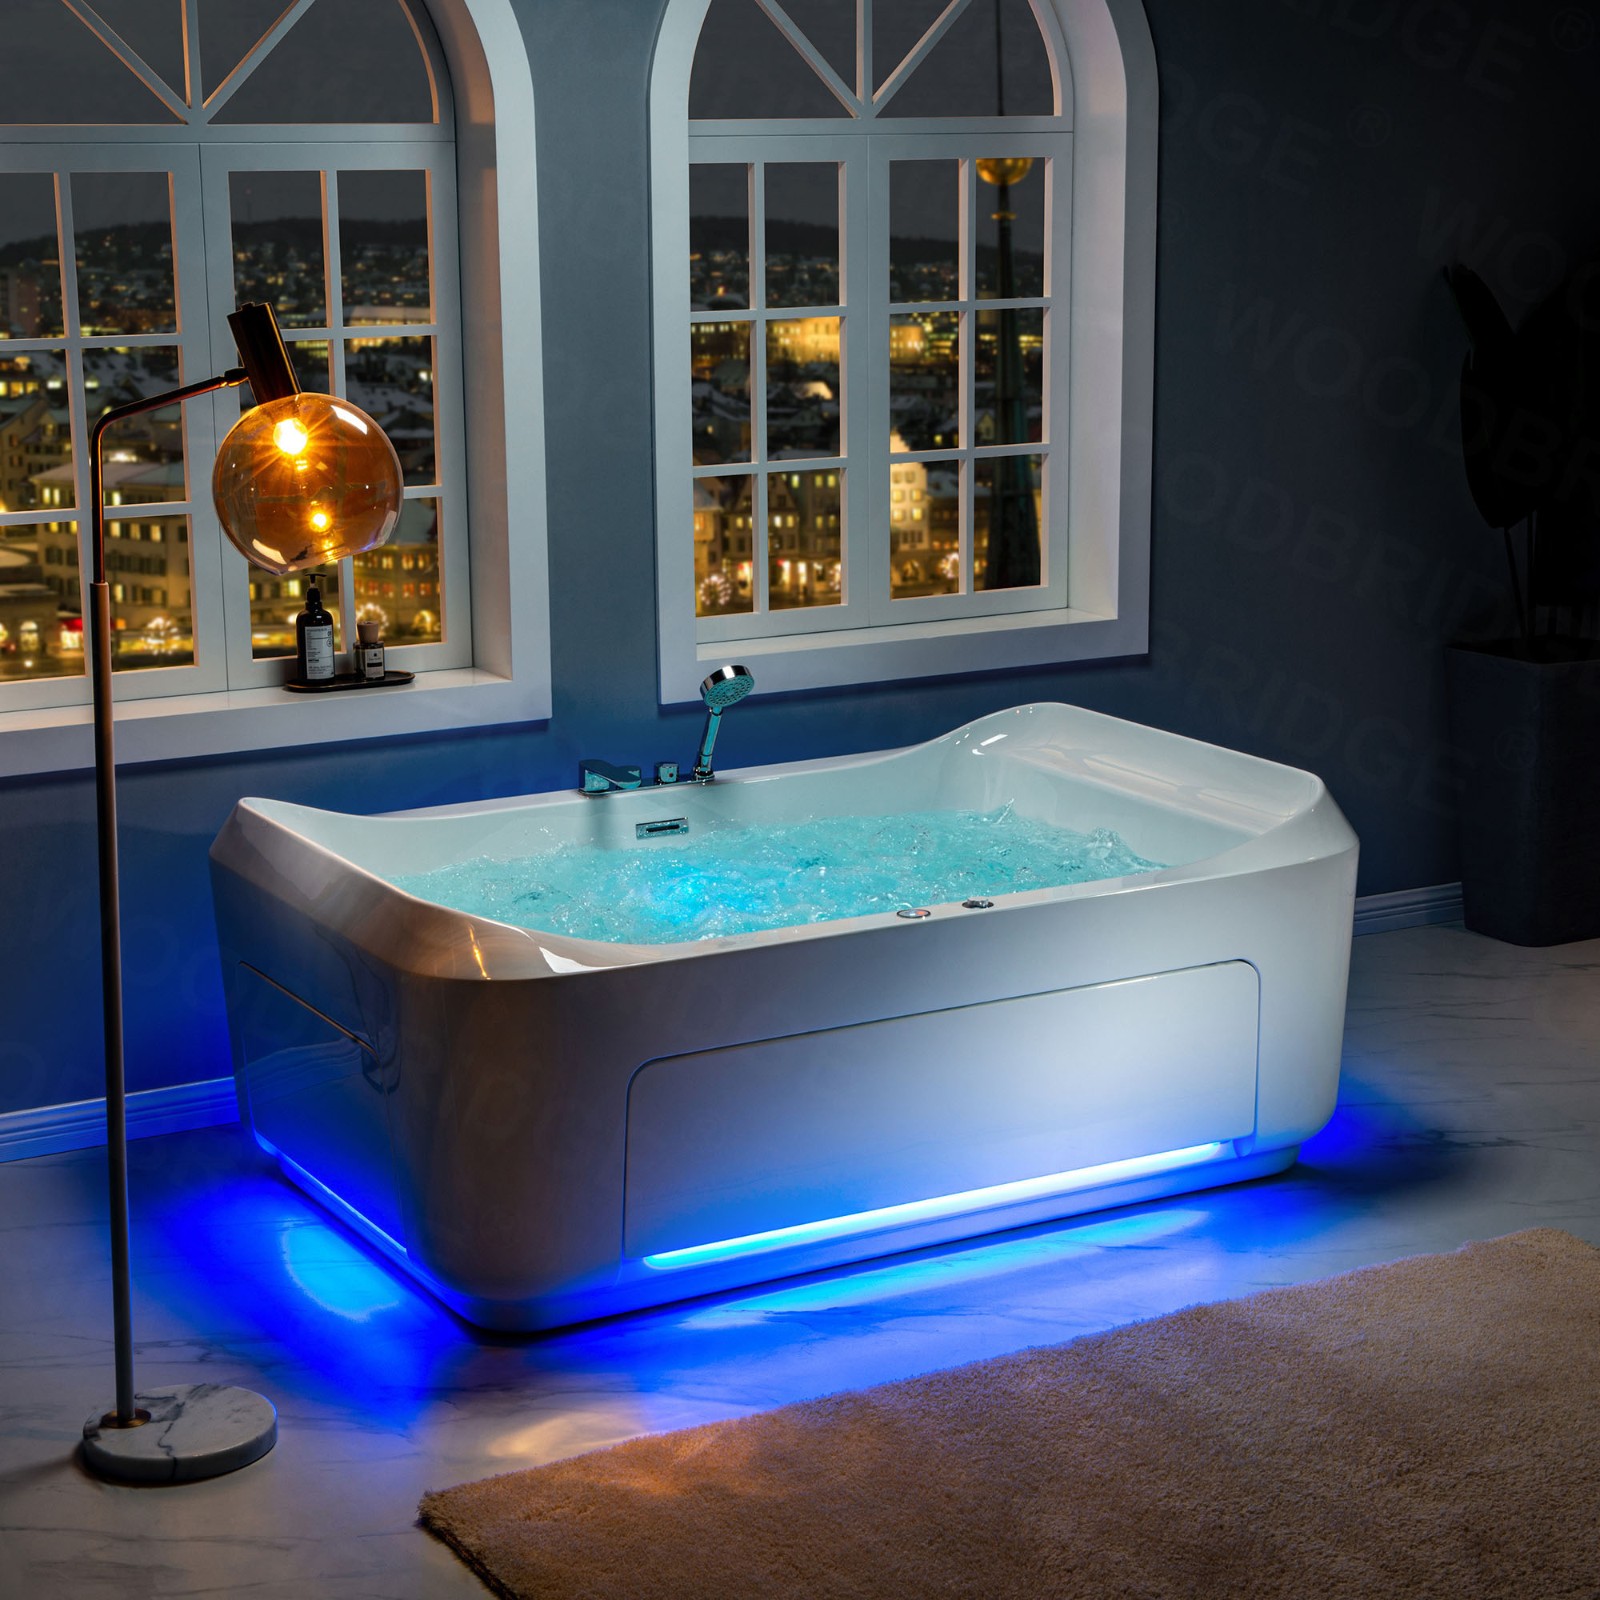  2 Person Freestanding Massage Hydrotherapy Bathtub Tub Hot Tub Spa, with Inline Heater. BTS-0091_9090